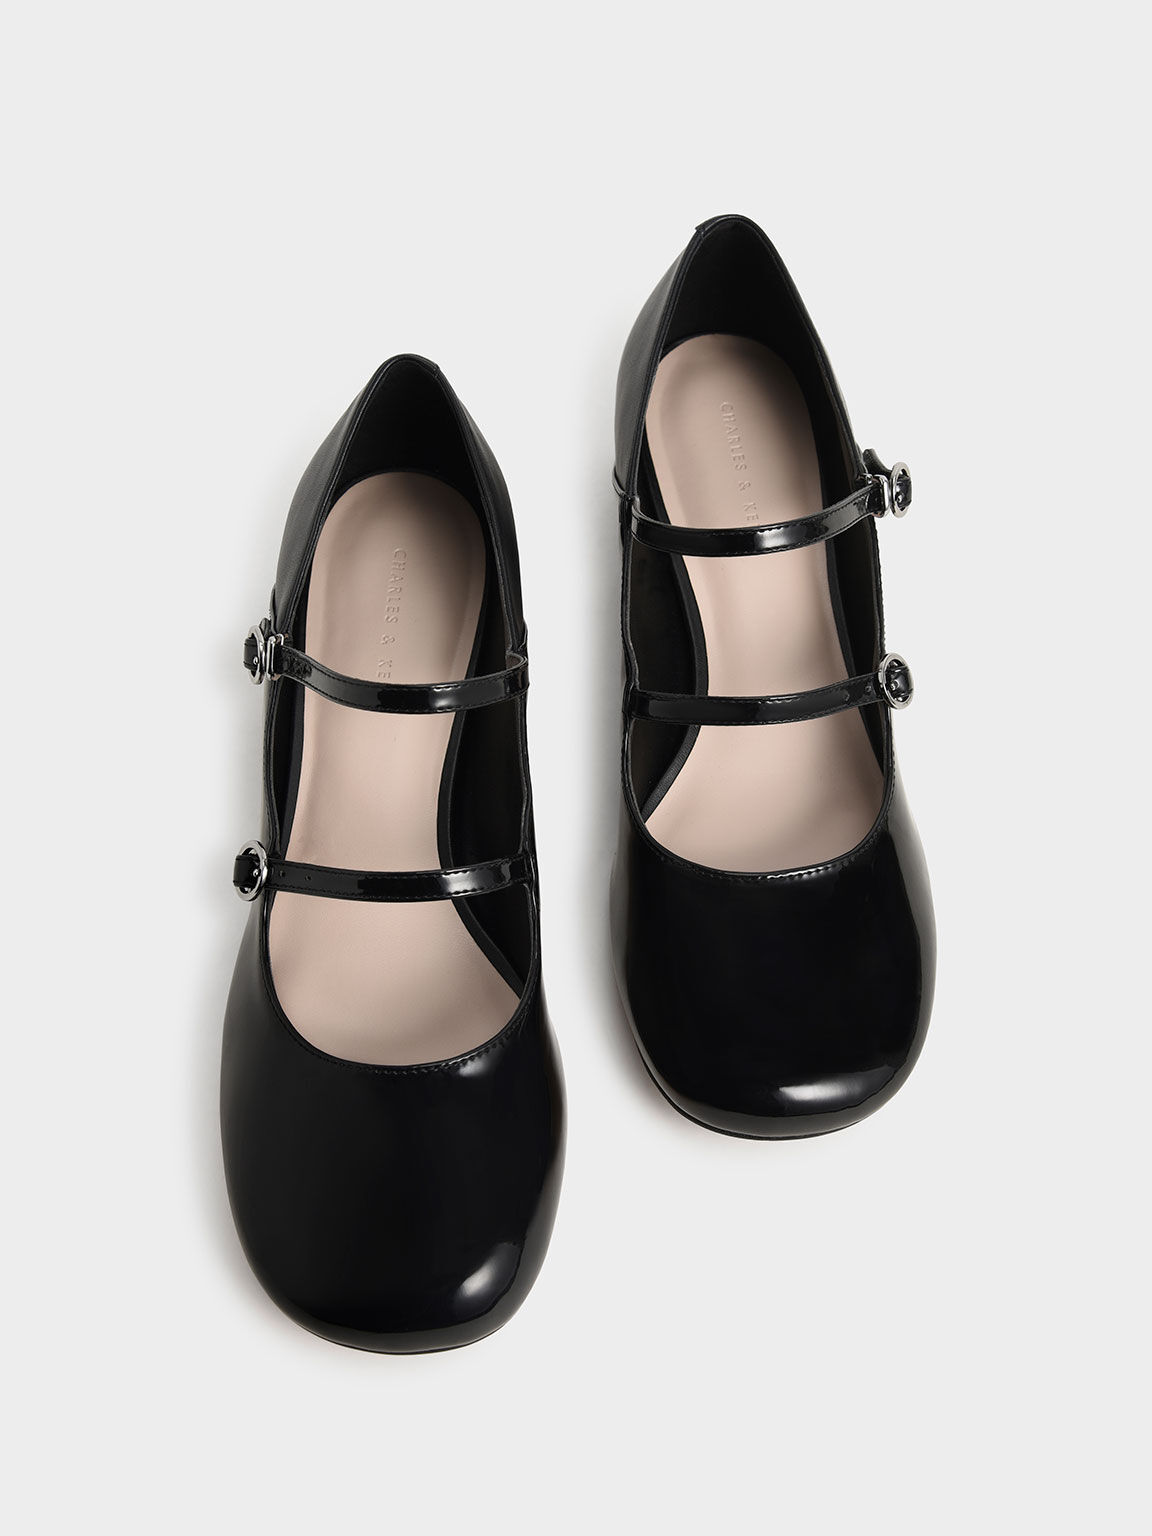 Patent Double-Strap Mary Janes, Black, hi-res